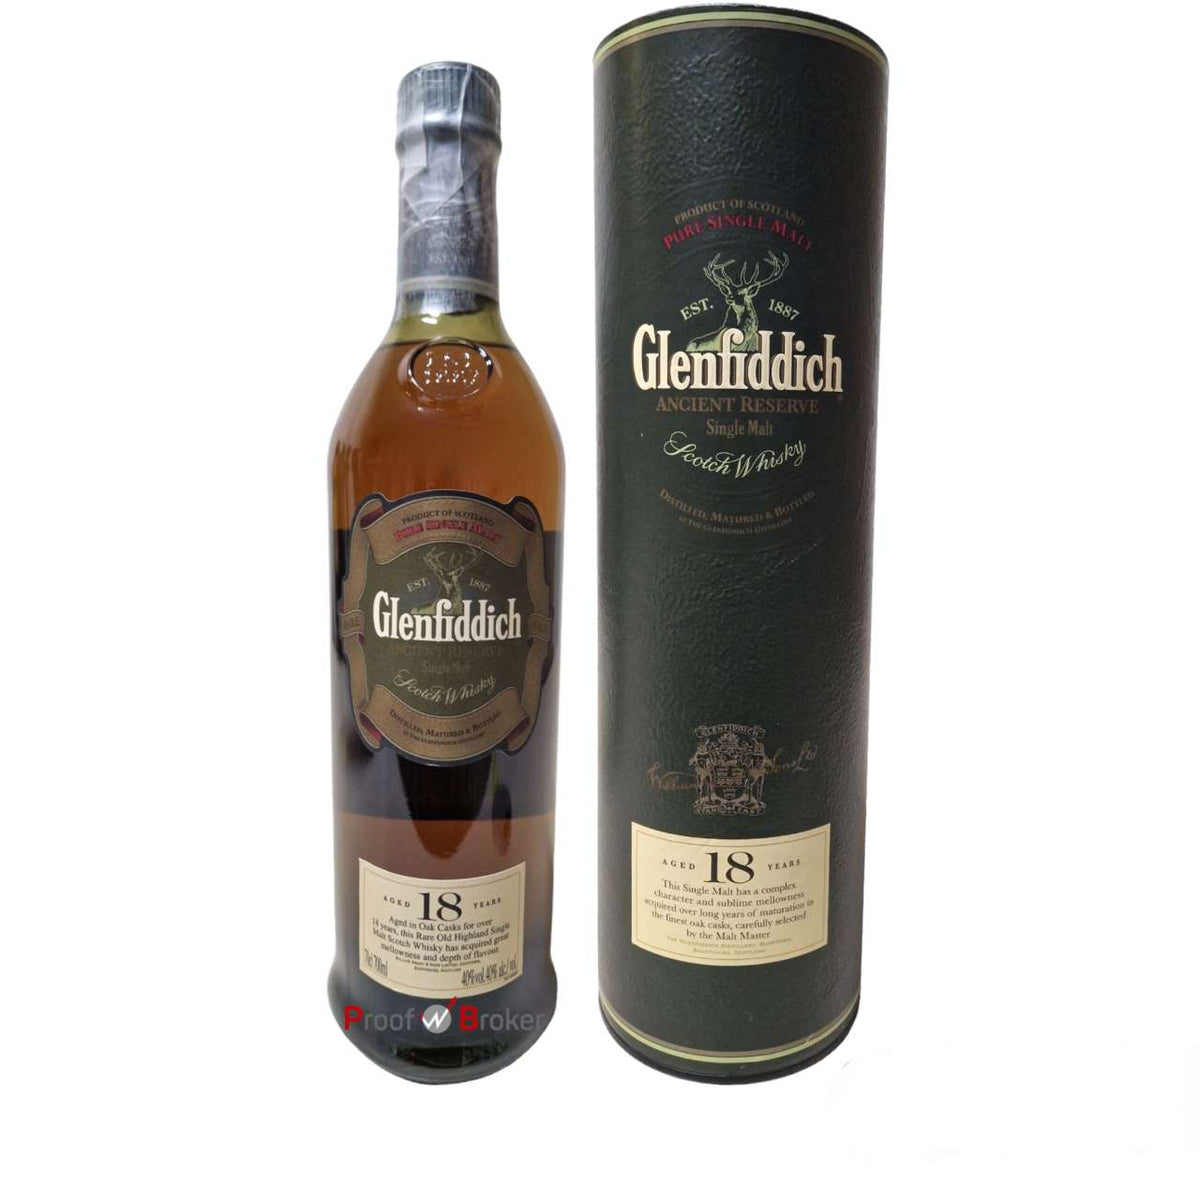 Glenfiddich 18 Years Old Ancient Reserve 0,7 L